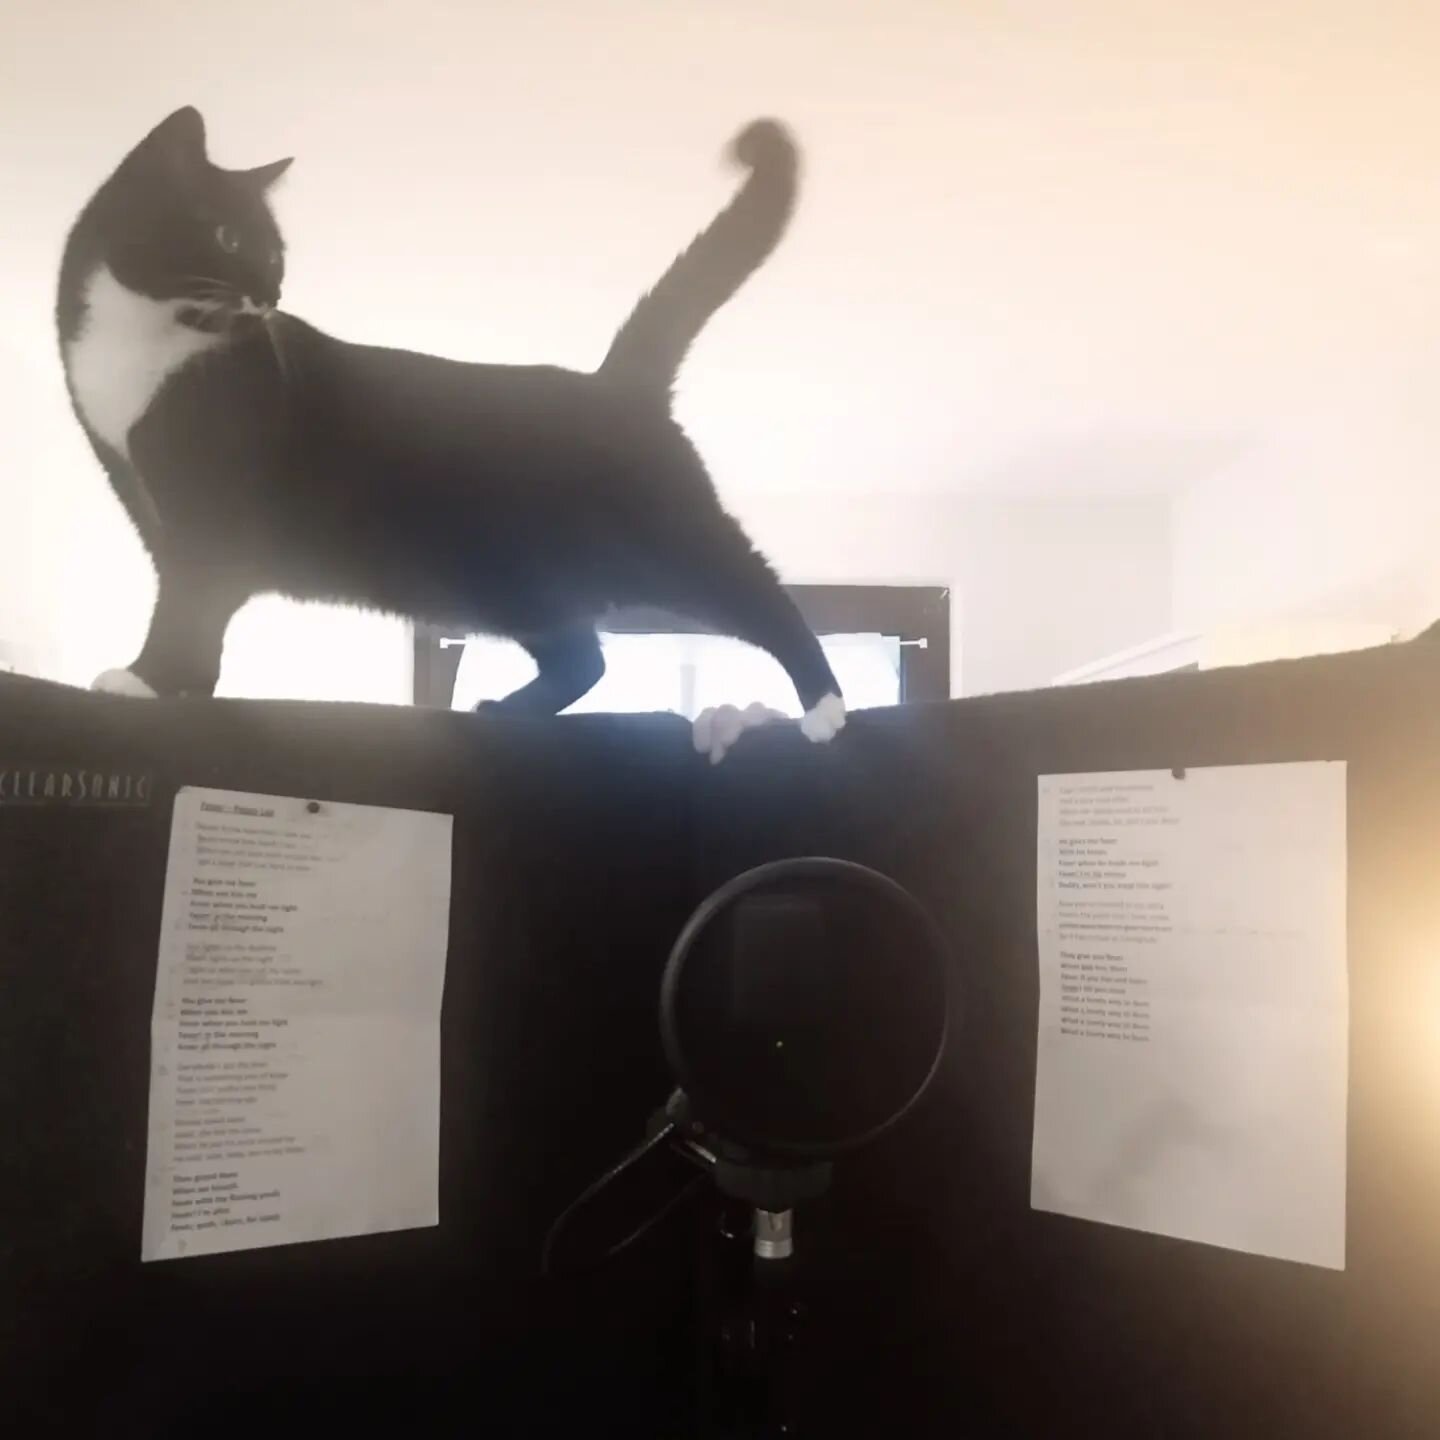 Special guest at our recording session today 🥰🎶

Our version of &quot;Fever&quot; is in the making - stay tuned 😊🎧

#recording #fever #singing #music #jazz #music #cat #specialguest #art #professional #life #musician #duet #joy #passion #friendsh